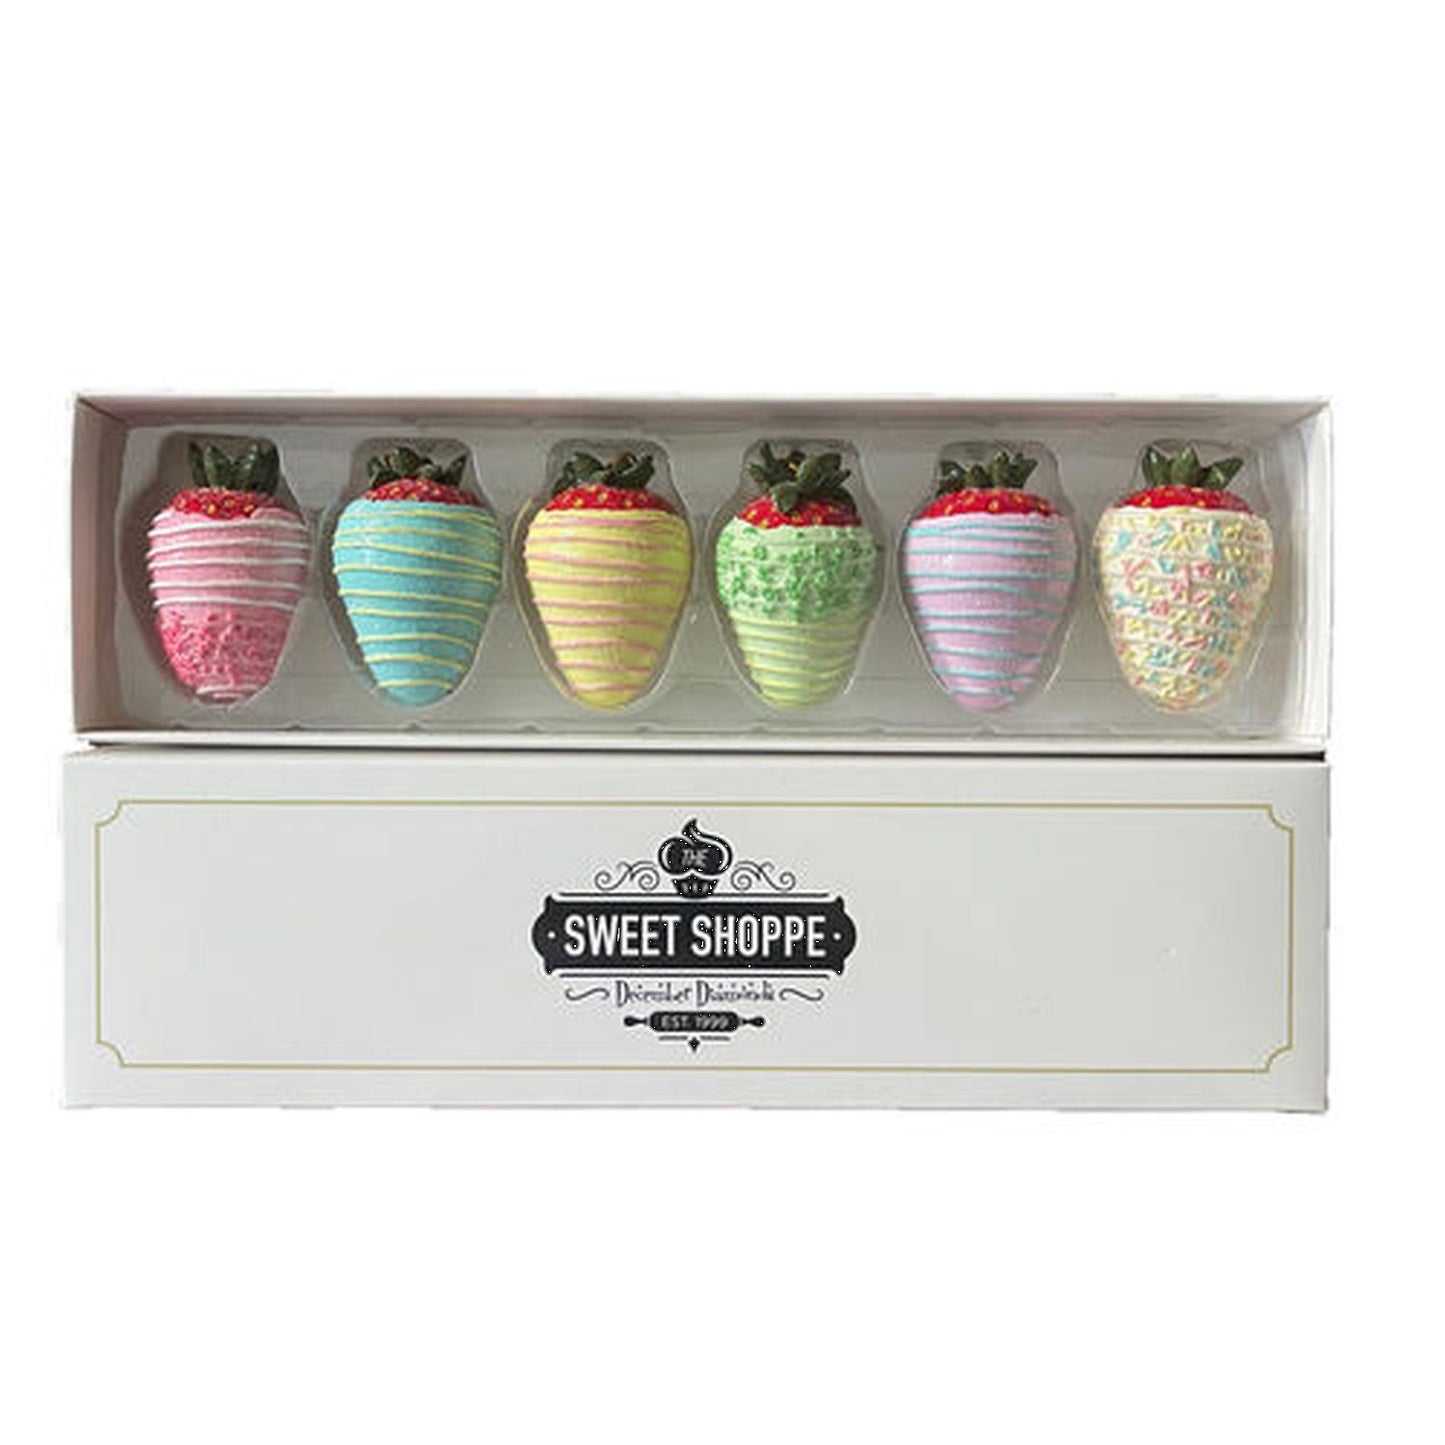 December Diamonds Cotton Candy - 6 Assortments Gift Boxed Straberry Ornament